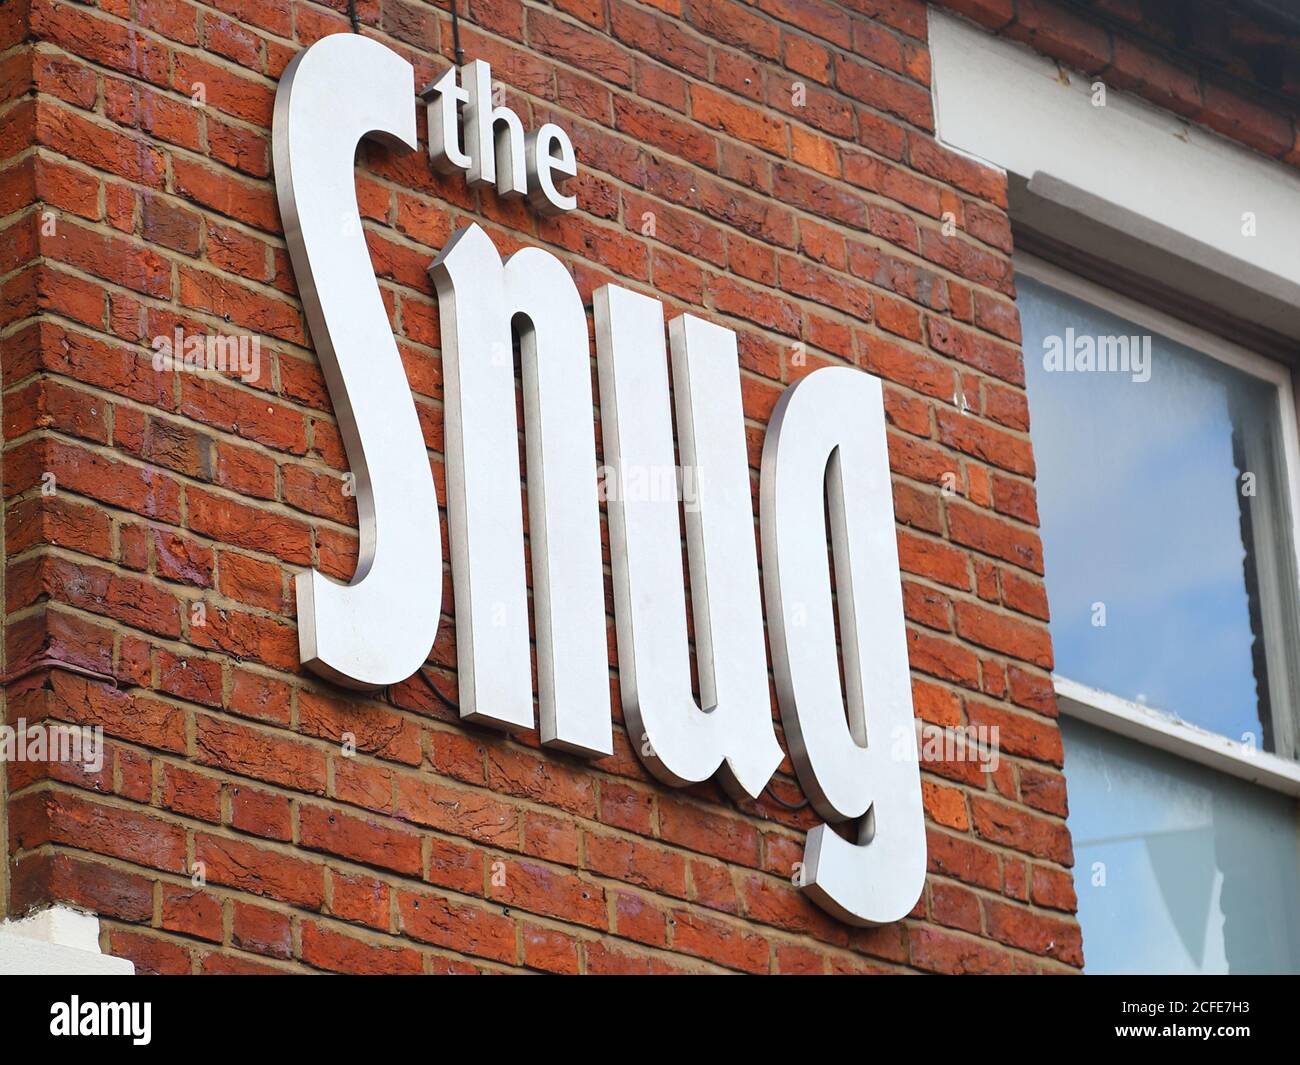 Sign at the Snug Bar in Crown Lane, High Wycombe, UK Stock Photo